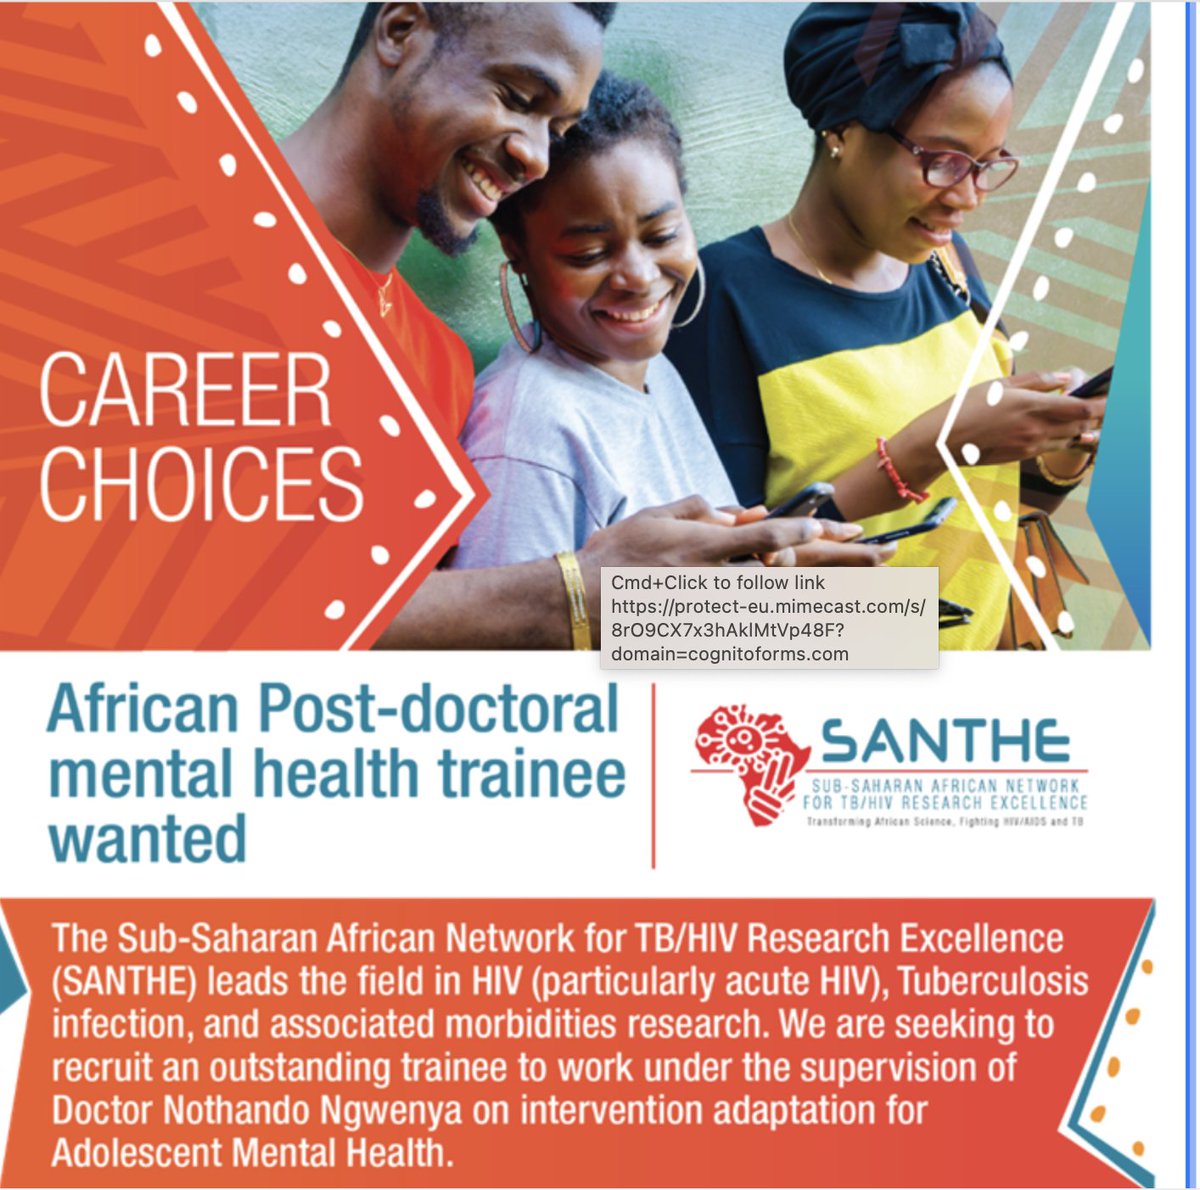 Click link to apply - deadline 31 Jan cognitoforms.com/AHRI1/FellowRe… @SANTHEafrica